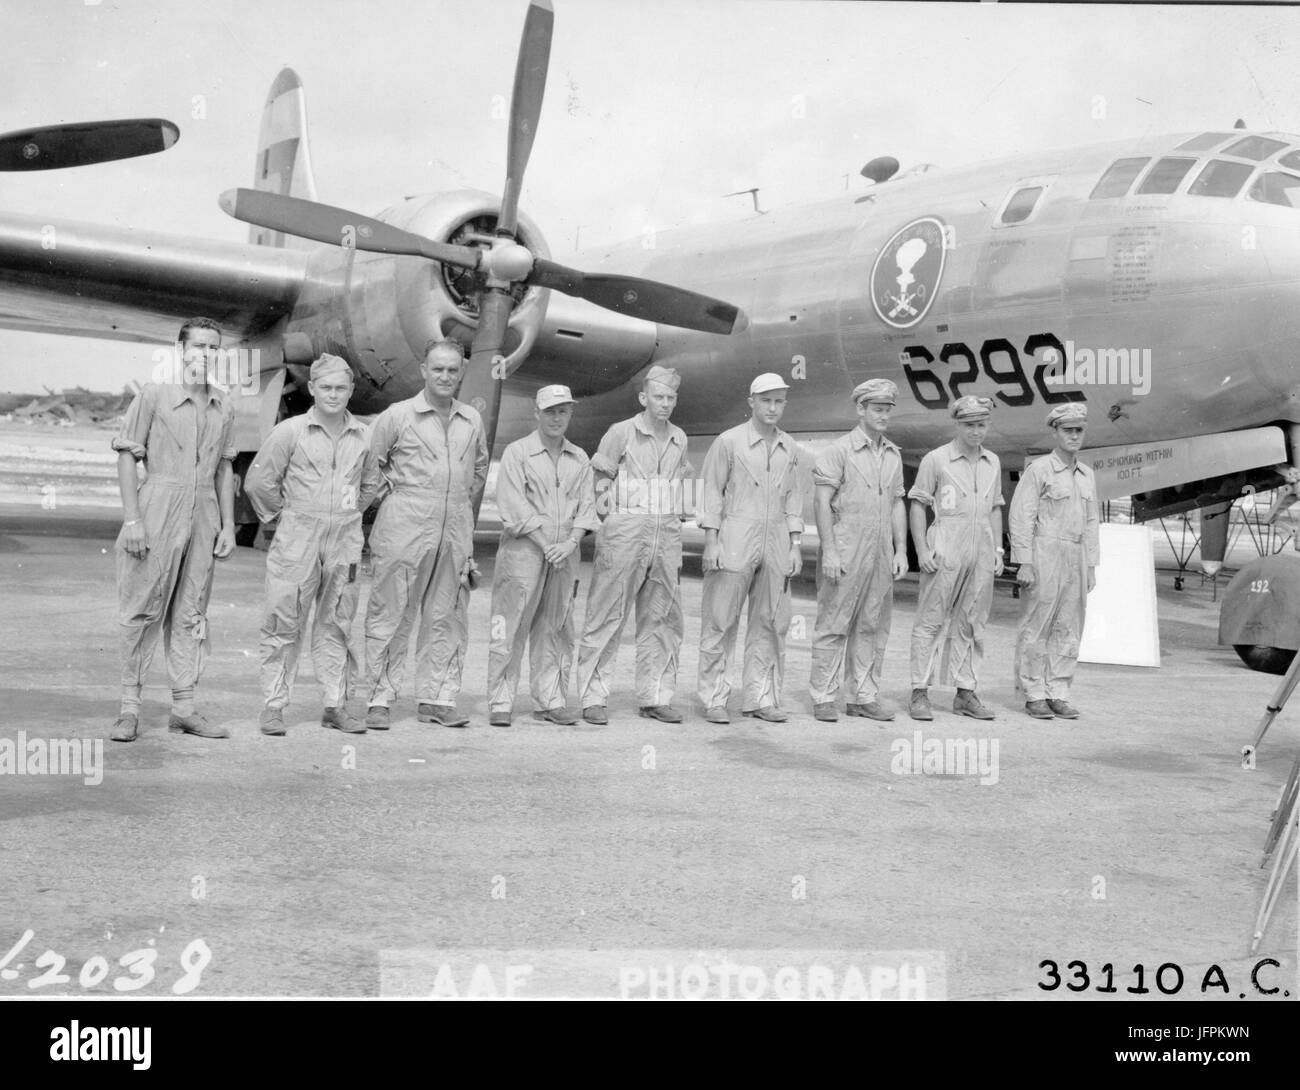 Crew of the Boeing B-29 'ENOLA GAY,' the plane that dropped atomic bomb on Hiroshima. From Left to right are: Sgt T.J. Healey; Sgt C.O. Wentzell; S/Sgt H.E. Osmond; M/sgt W.F. Orren; M/Sgt W. Duzenbury; Lt J. M. Anderson; Maj T. Ferrebee; Maj T. Van Kirk; and Col Paul W. Tibbets. Kwajalein, 13 June 1946. Stock Photo